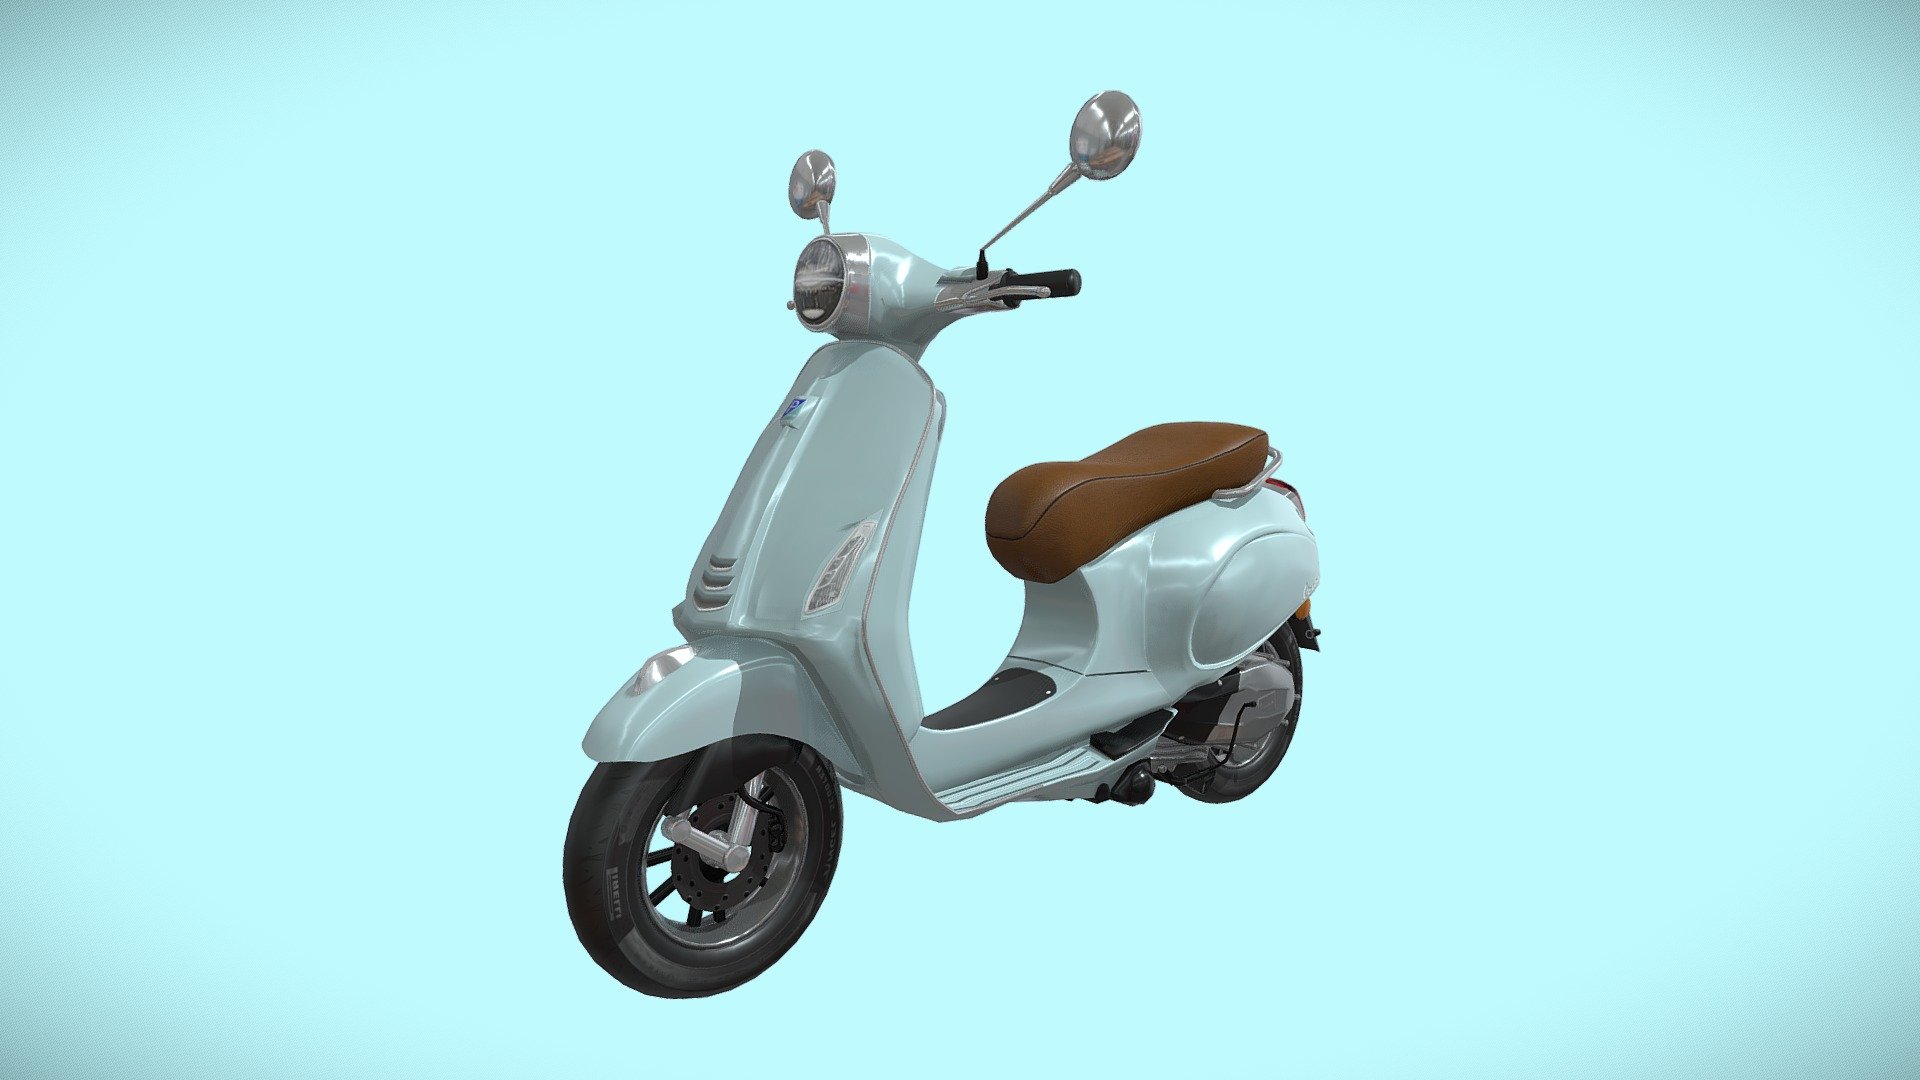 This is Vespa Primavera 150 model of Scooty 3d Model.

The model was created in Maya 2018, rendered with Substance painter, Clean topology based on quads. Detailed High quality model.

All Materials in this pack are provide with all named.

Model Type: Polygonal
Polygons: 18,341
Vertices: 18,897
Formats available: Maya ASCII 2018, Maya Binary 2018, FBX , OBJ
Textures: Color, Normal, Metallic, Roughness, Ambient Occlusion, Curvature and Thickness
Texture Resolution: 4096 x 4096 pixels

If the price is not suitable for you can contact me and discuss the price.

Please don't forget to rate the model.

Hope you like it!

Thank You 3d model